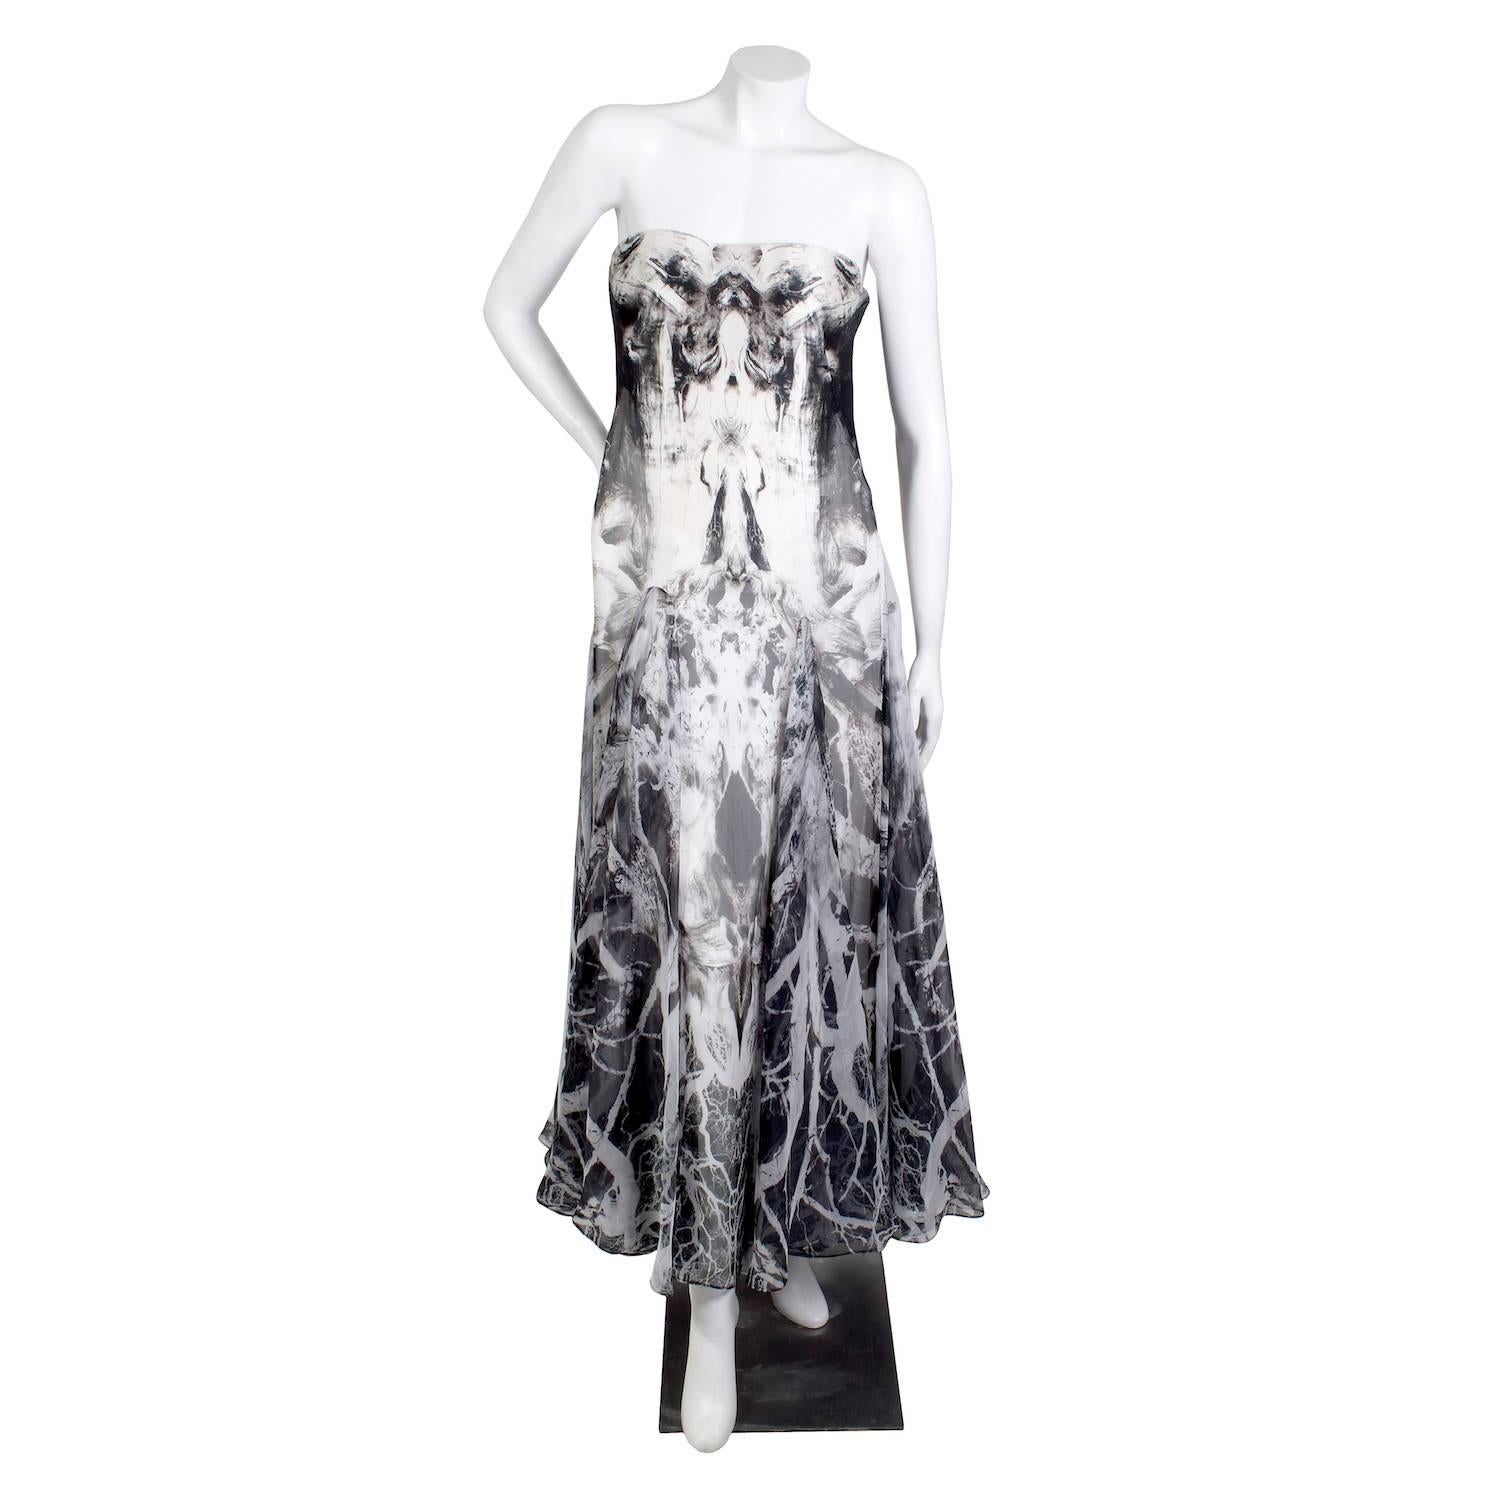 Product Details:
Strapless dress by Alexander McQueen from 2010
The print was designed by Tim Holloway, an intern at Alexander McQueen in 2010
The graphic is based on photographs Holloway took in parks around Clerkenwell, where the Alexander McQueen